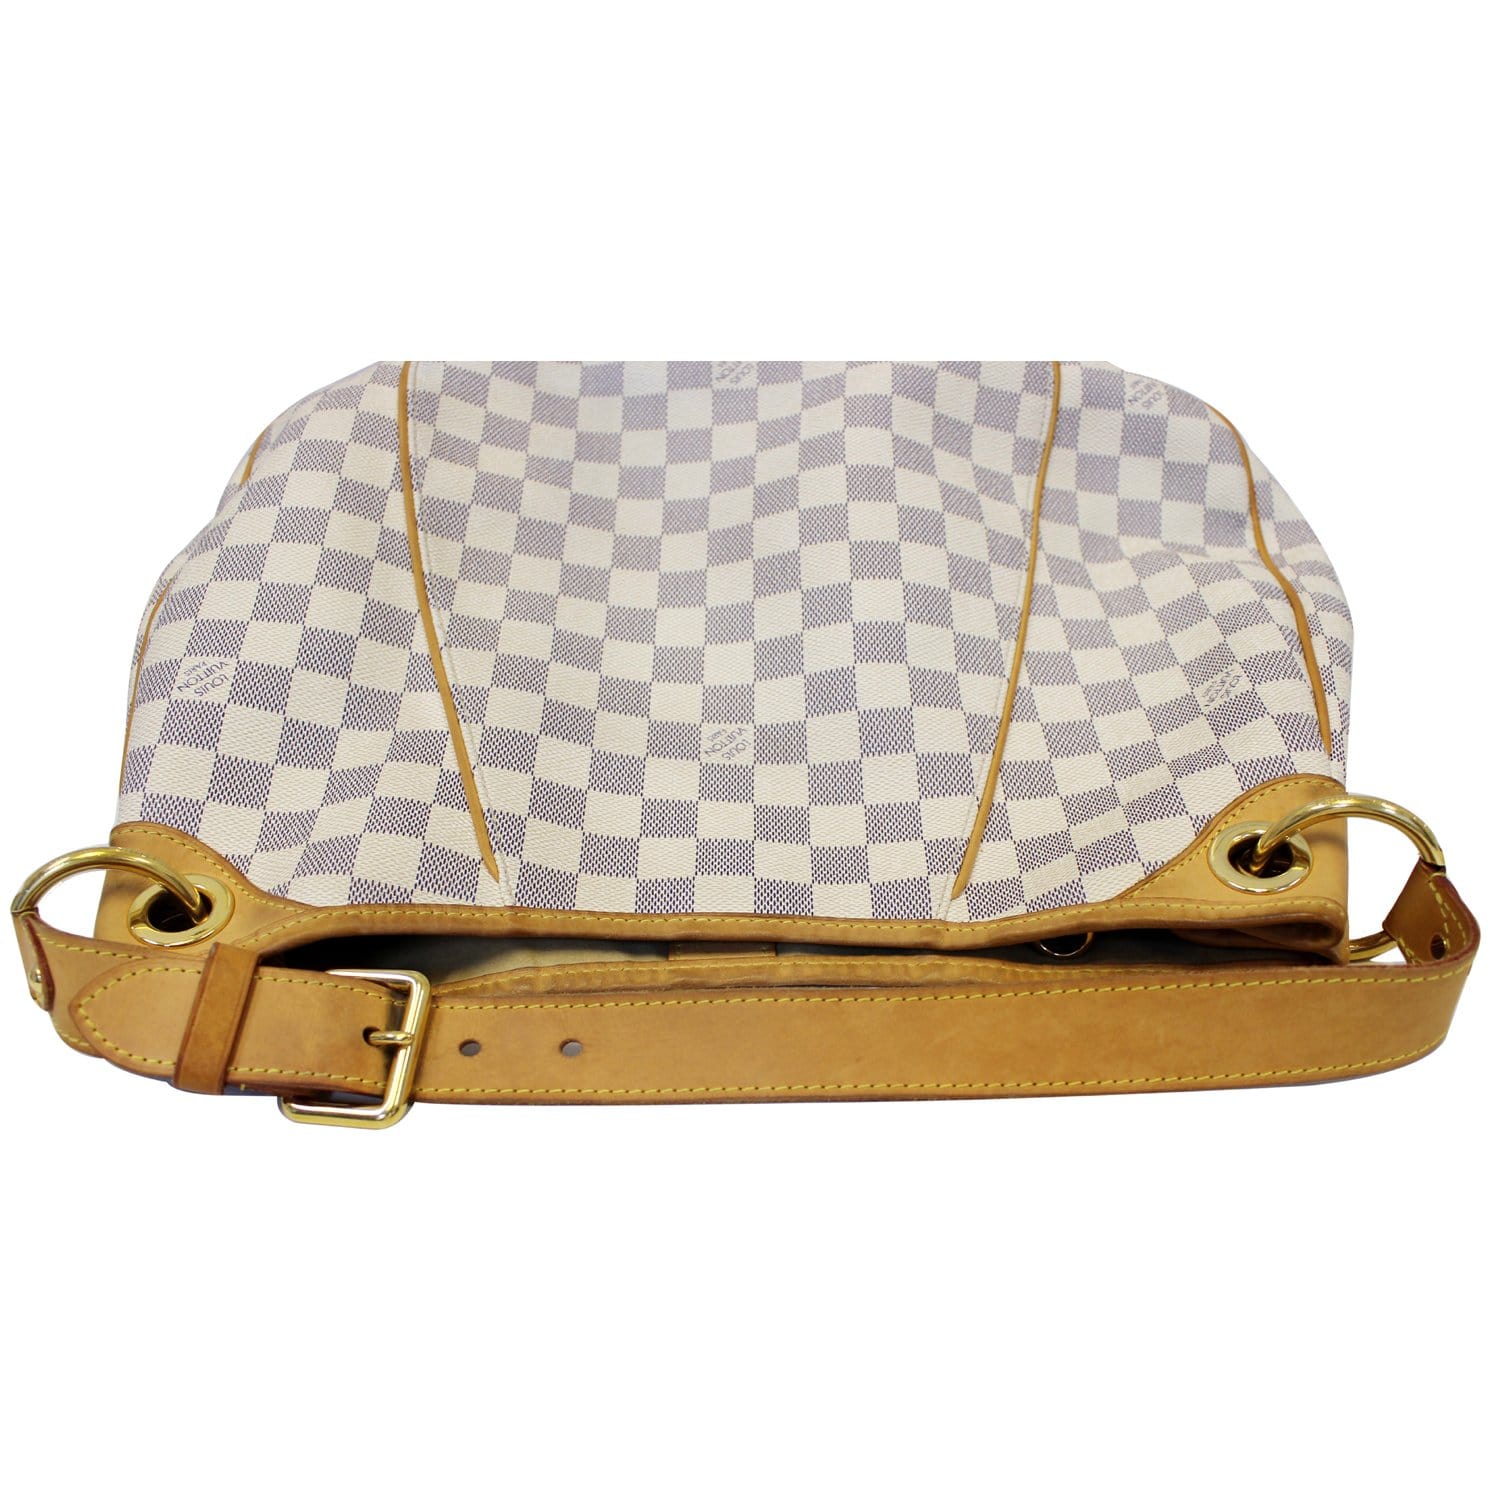 JUST IN! Louis Vuitton Damier Azur Galliera PM! Call/text us at  ***-***-**** if you would like additional information or would like to  purchase!